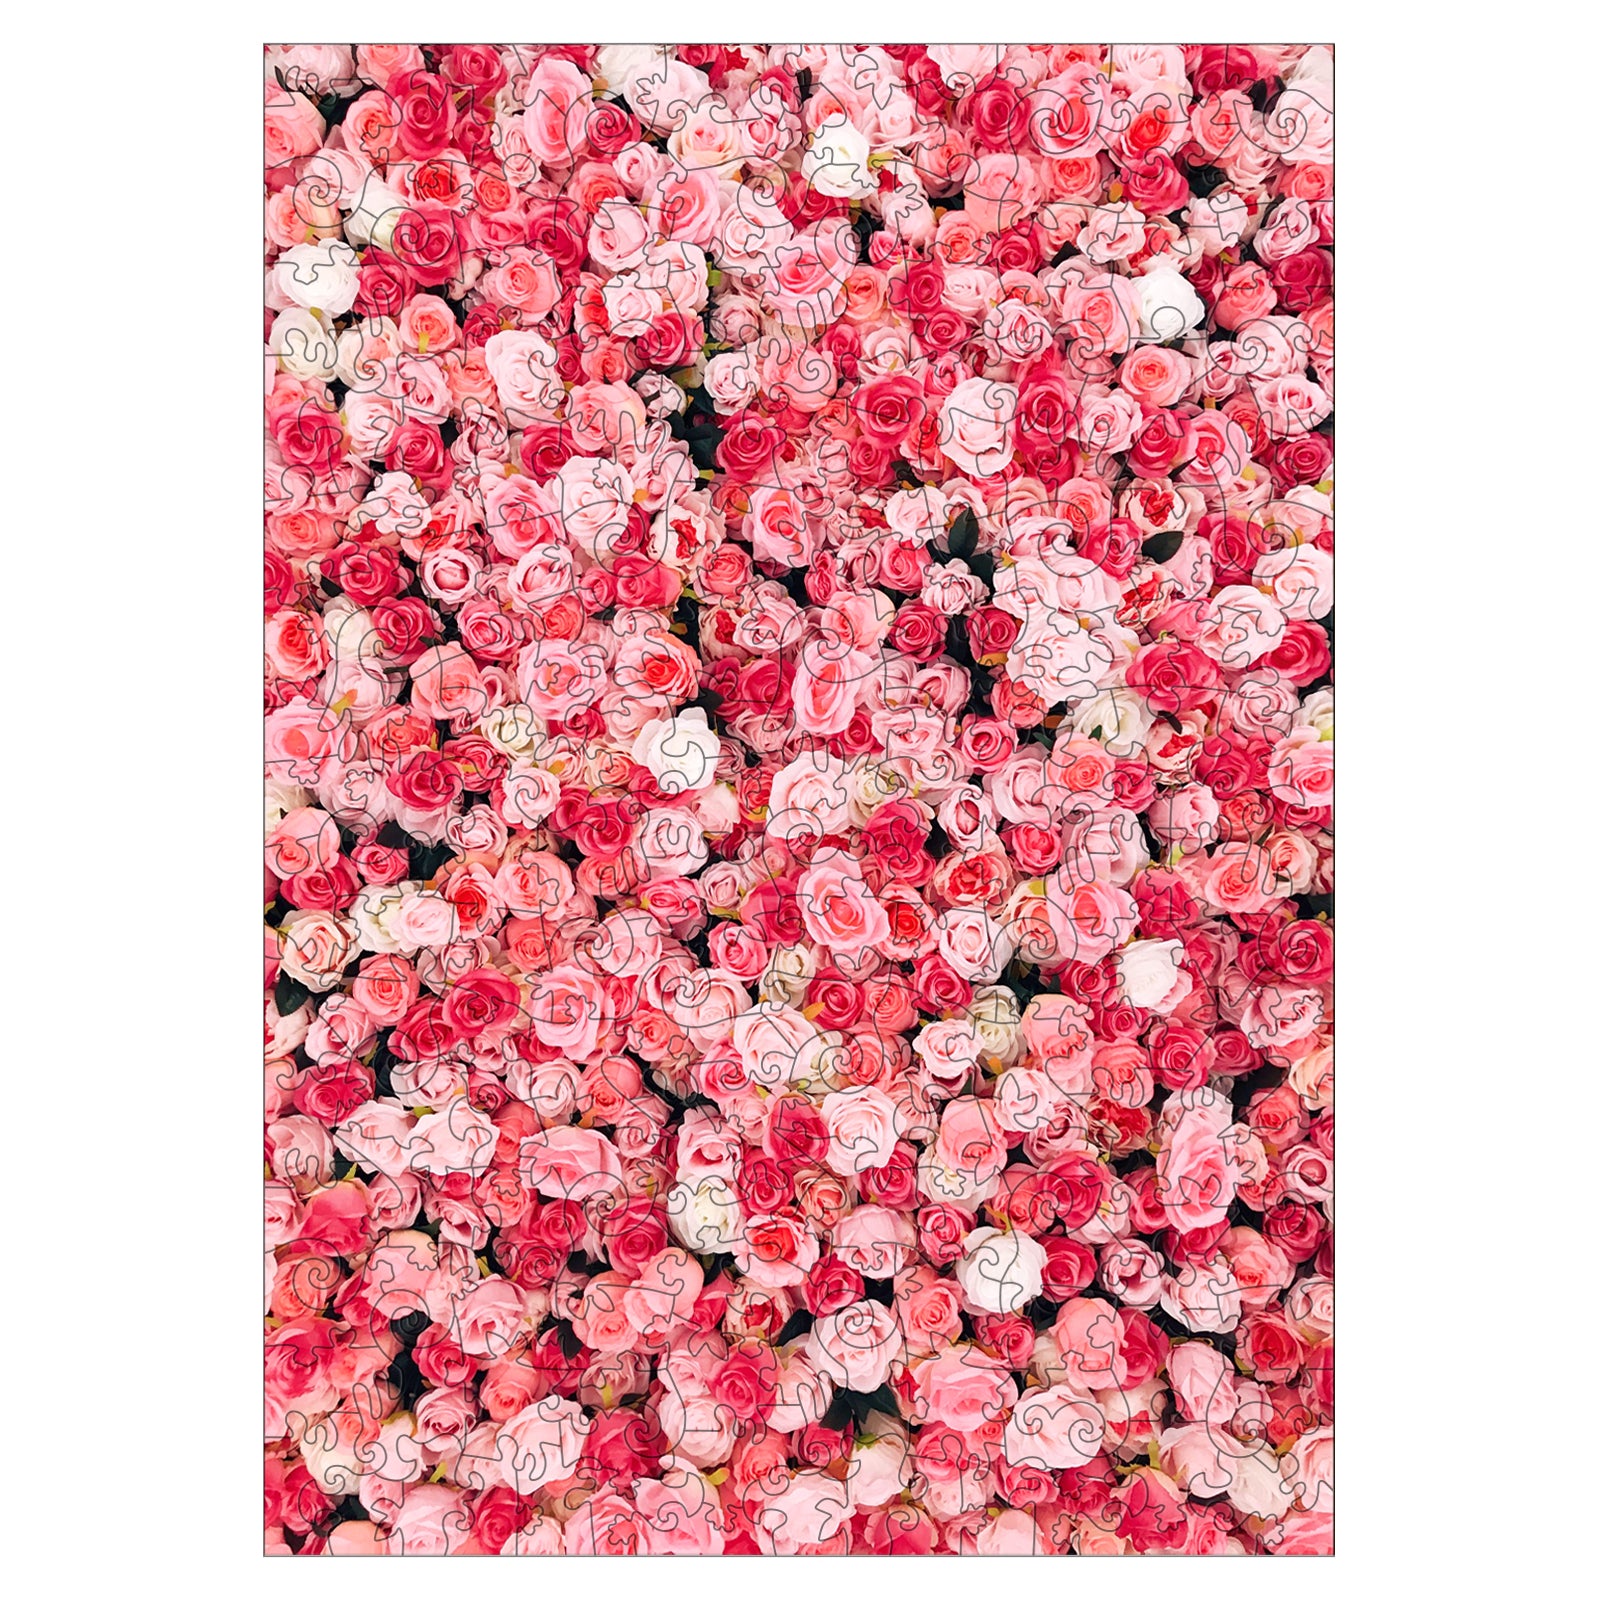 Rose Wooden Jigsaw Puzzle